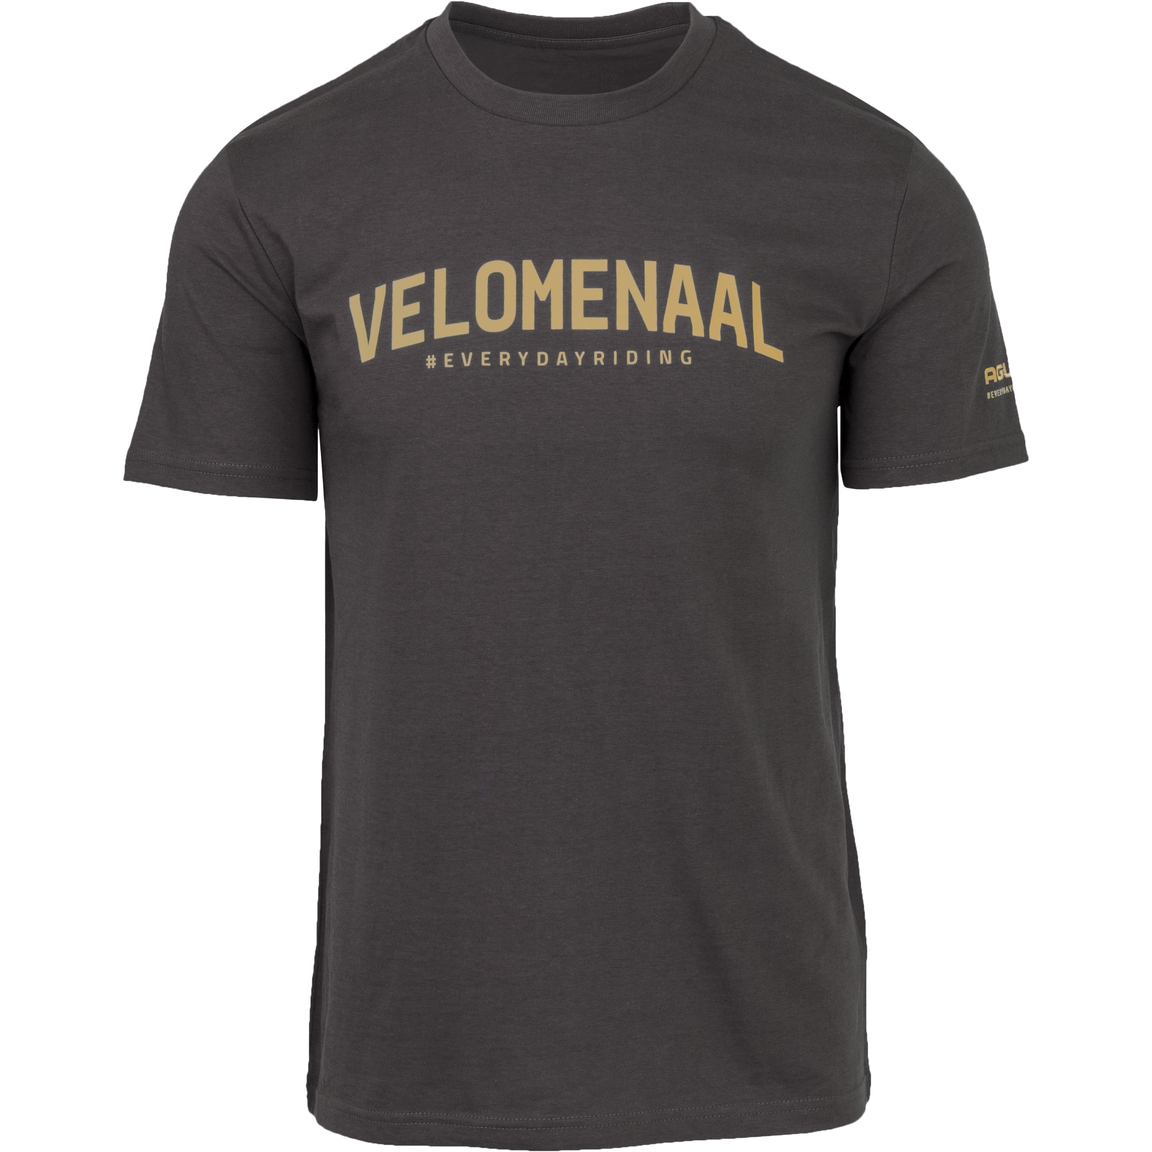 Image of AGU Casual Velomenaal T-Shirt - antracite